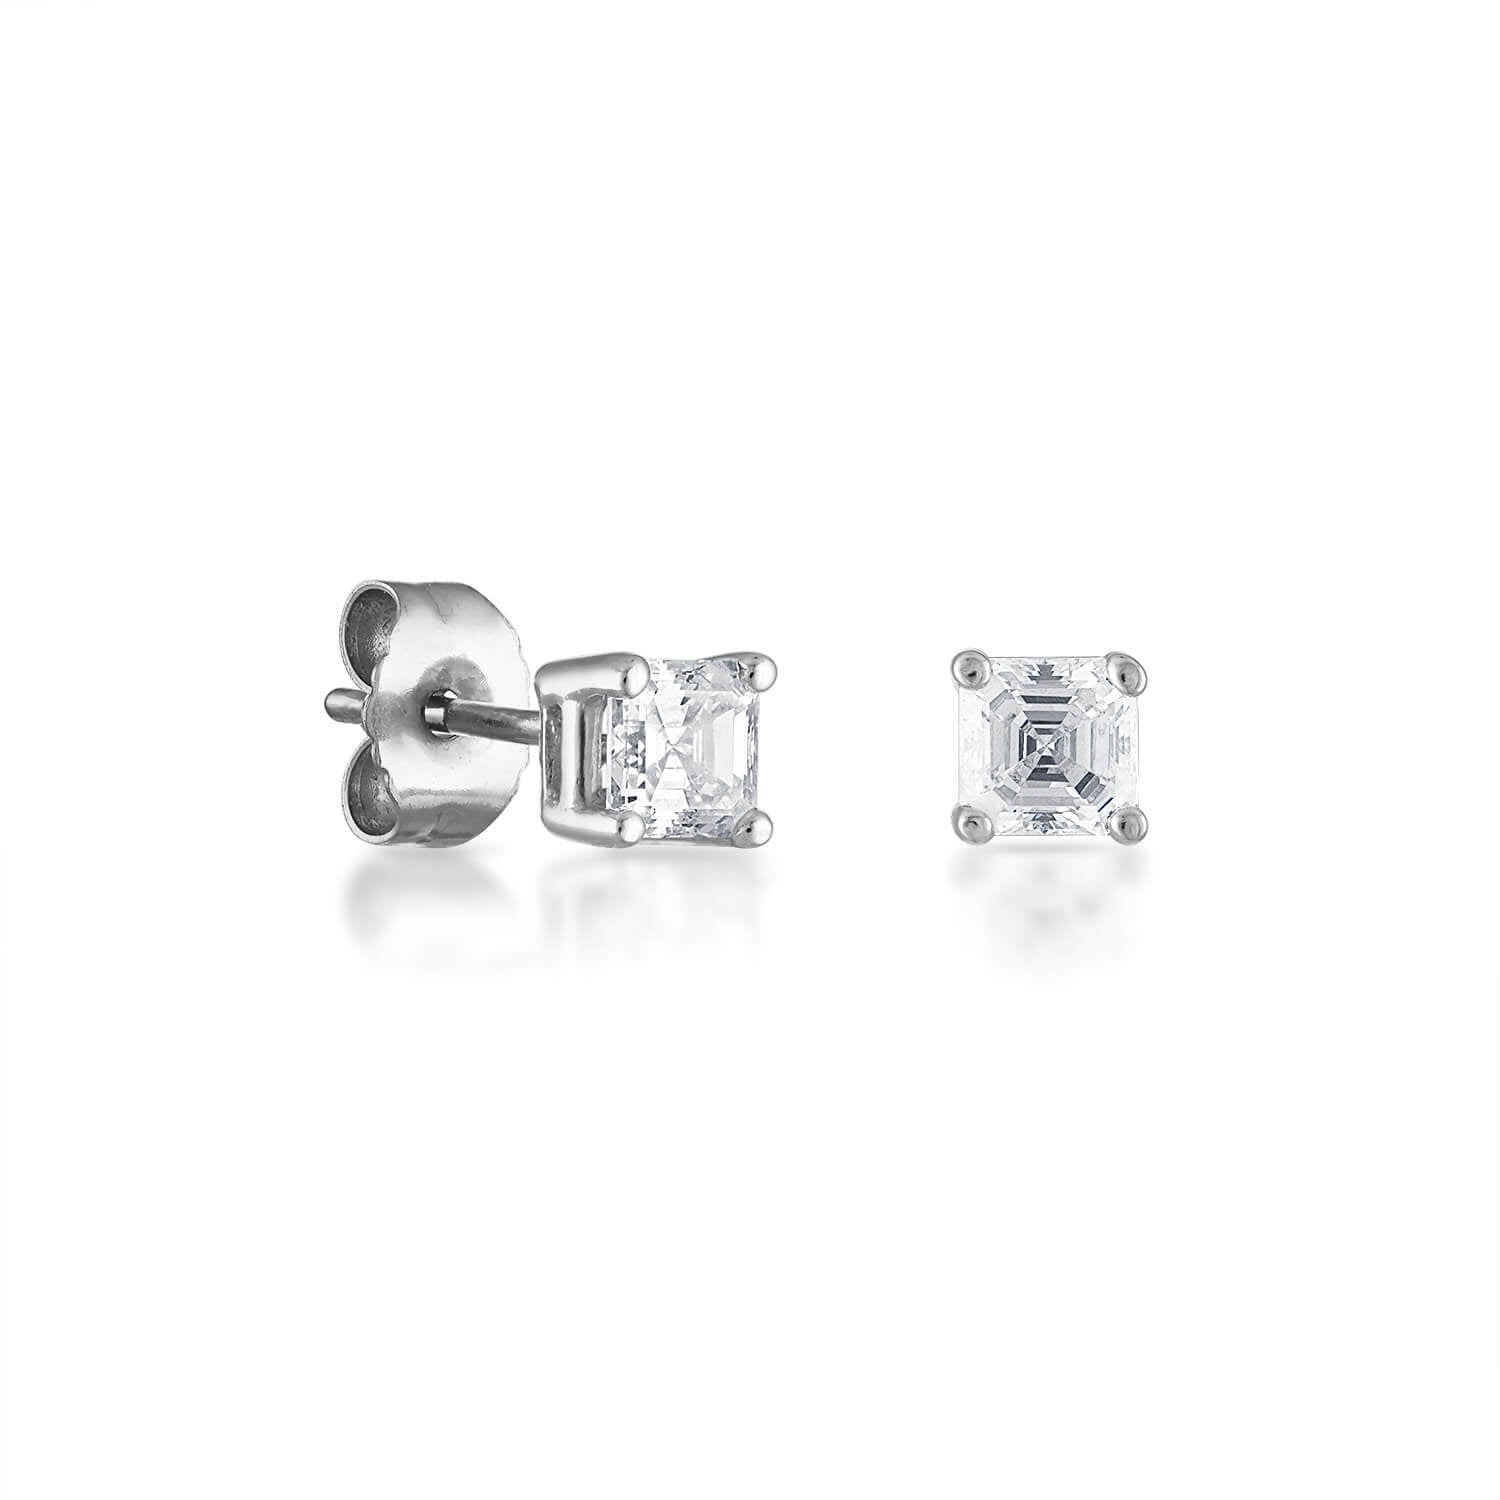 Provident Jewelry  All about Asscher  This stunning combo features  multishaped drop earrings each topped with a 4 carat Asscher diamond and  a 674 carat Asscher cut diamond engagement ring Perfect